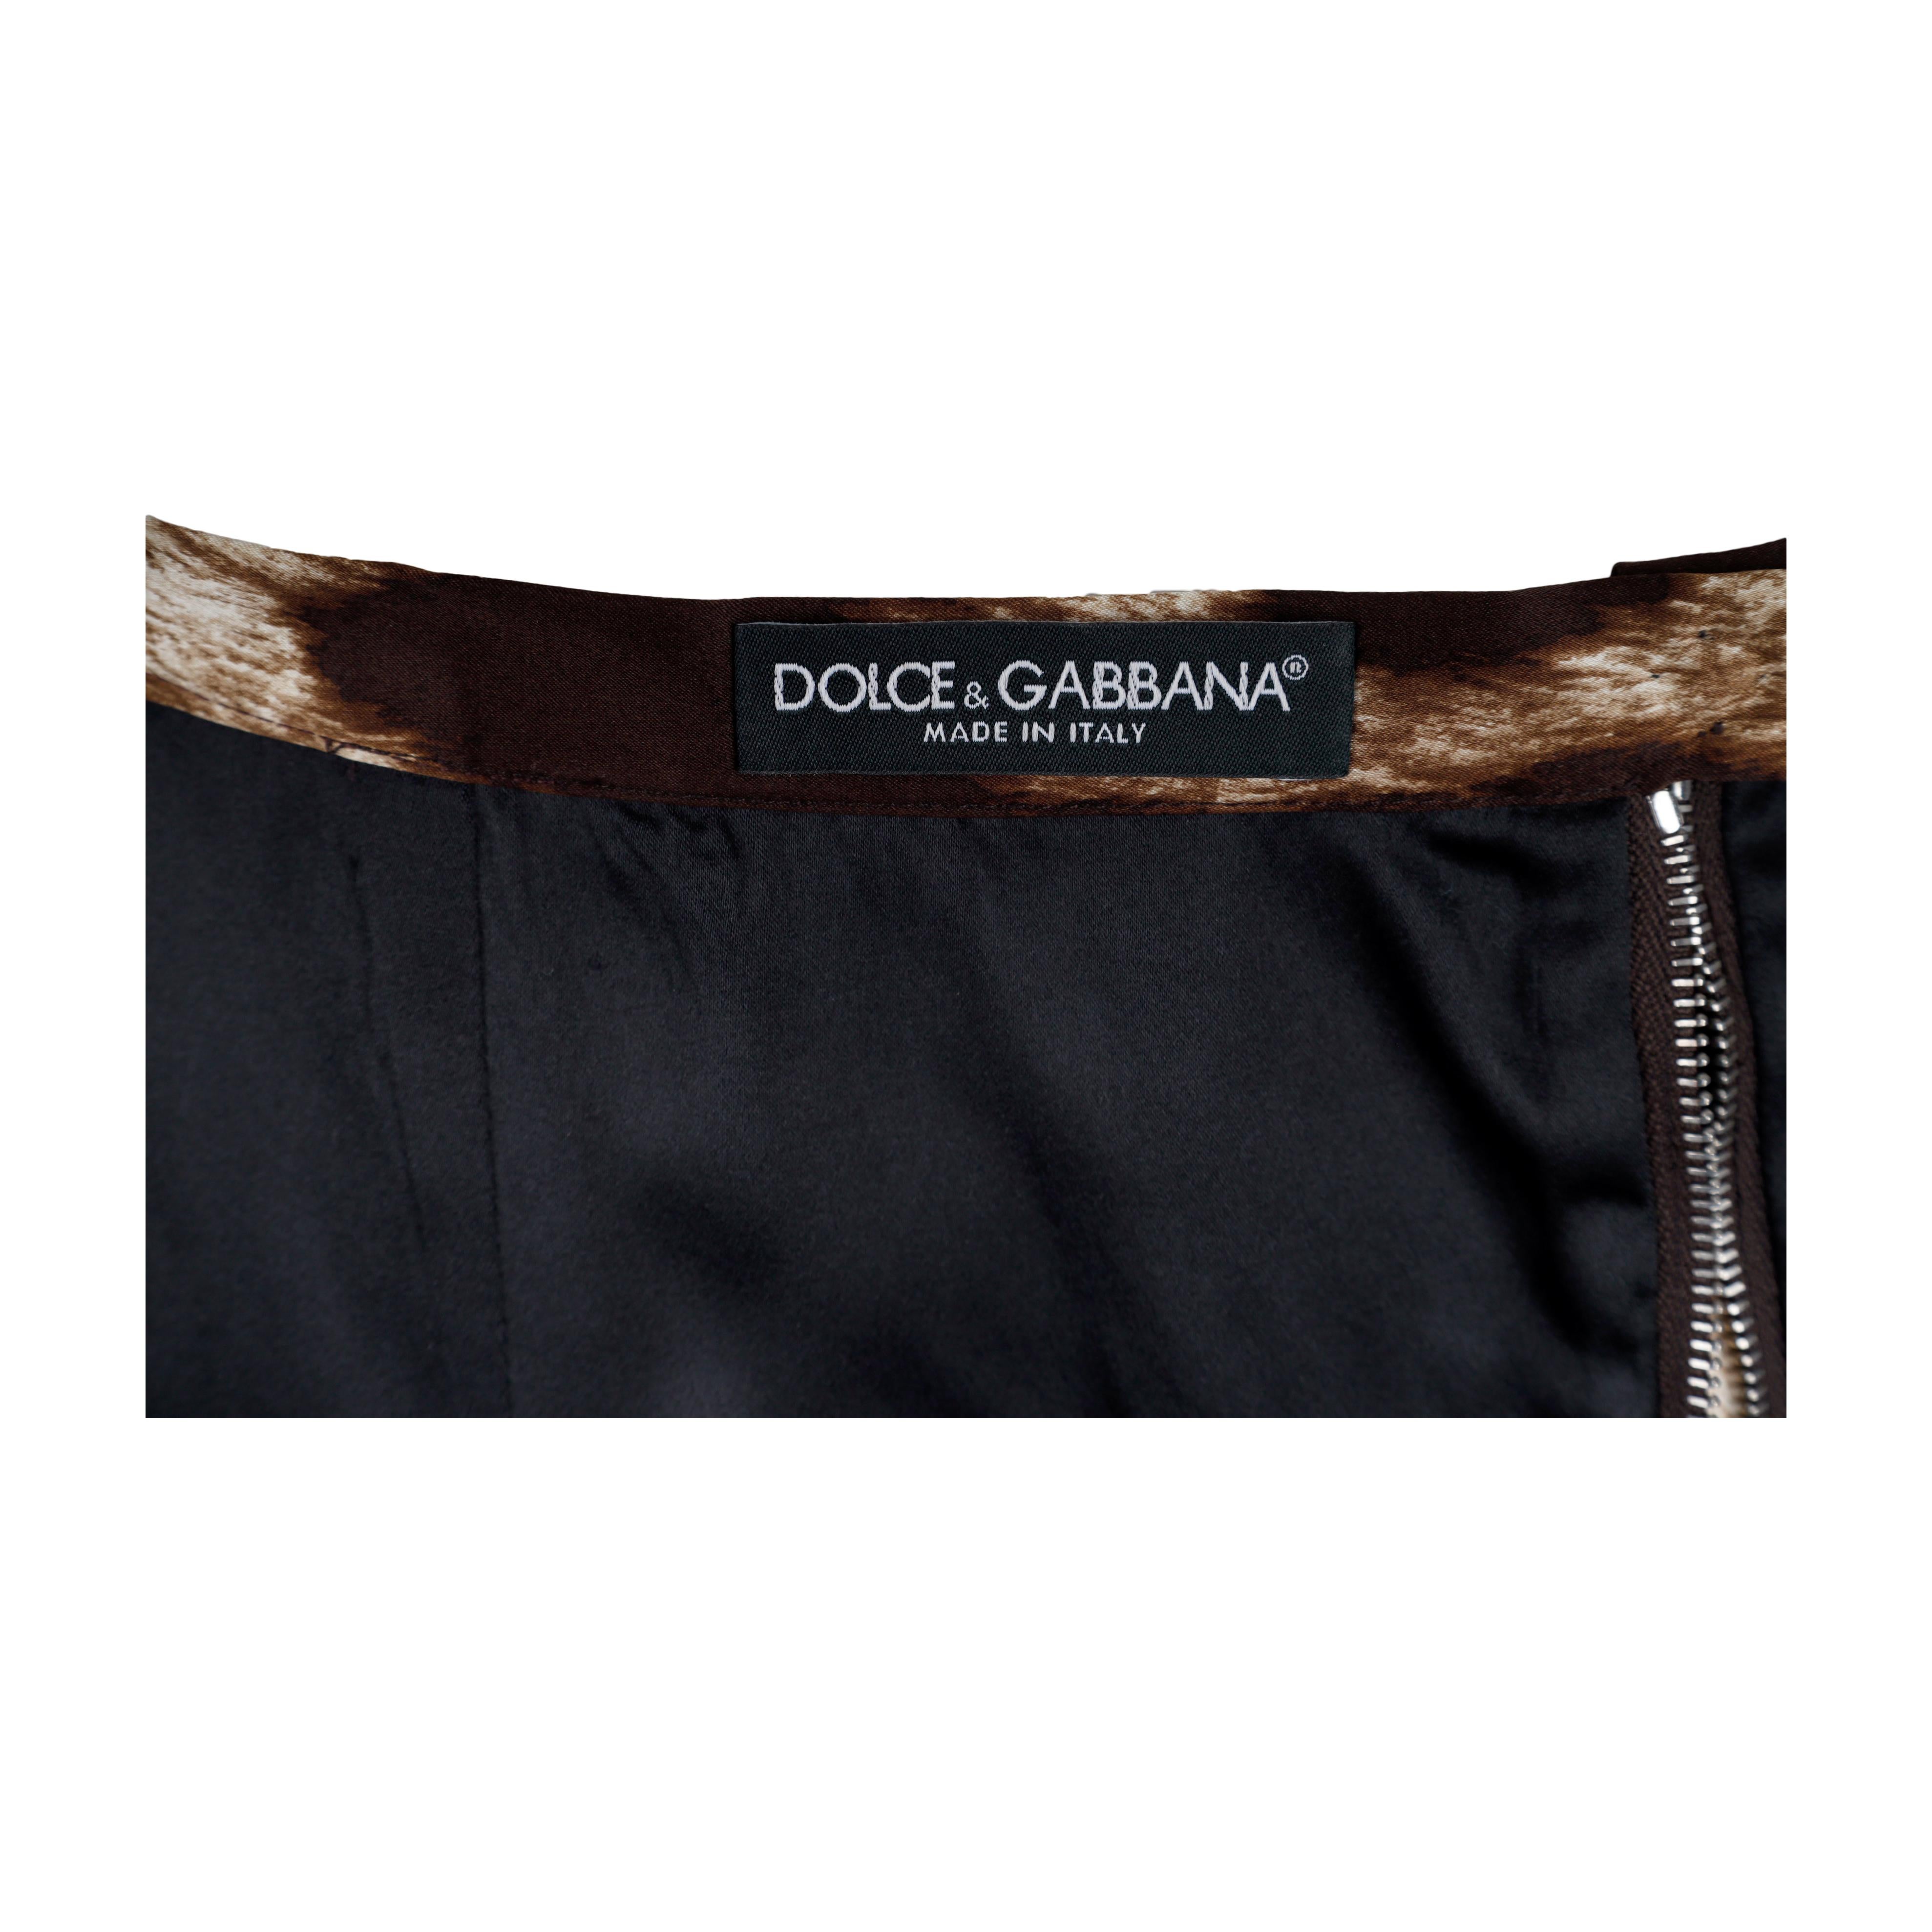 Dolce & Gabbana Leopard Print Skirt  In Excellent Condition For Sale In Milano, IT